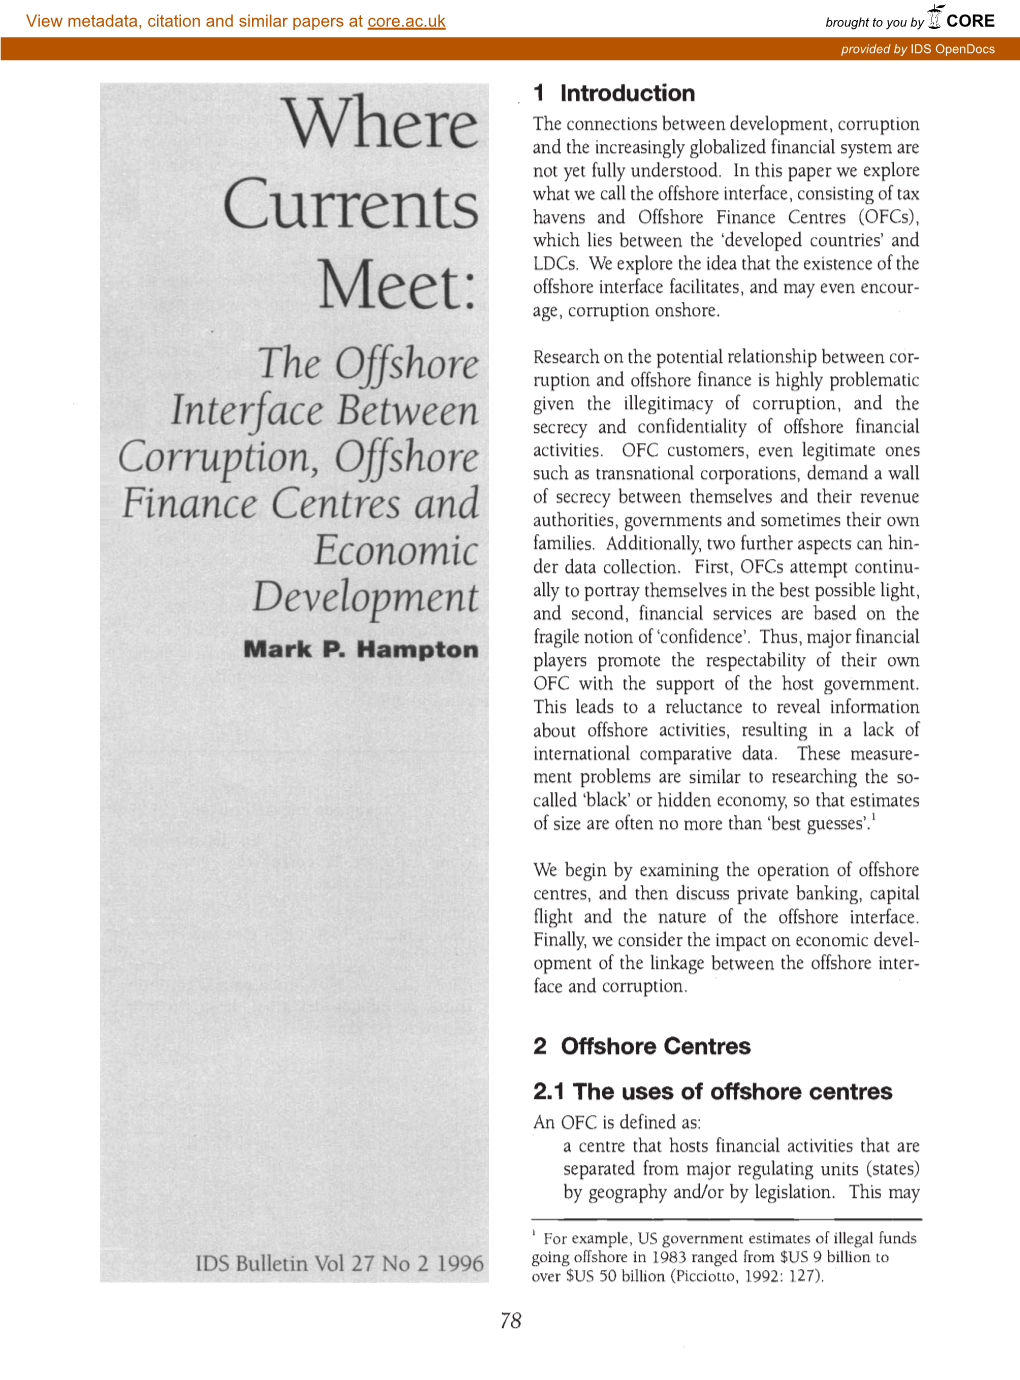 Where Currents Meet: the Offshore Interface Between Corruption